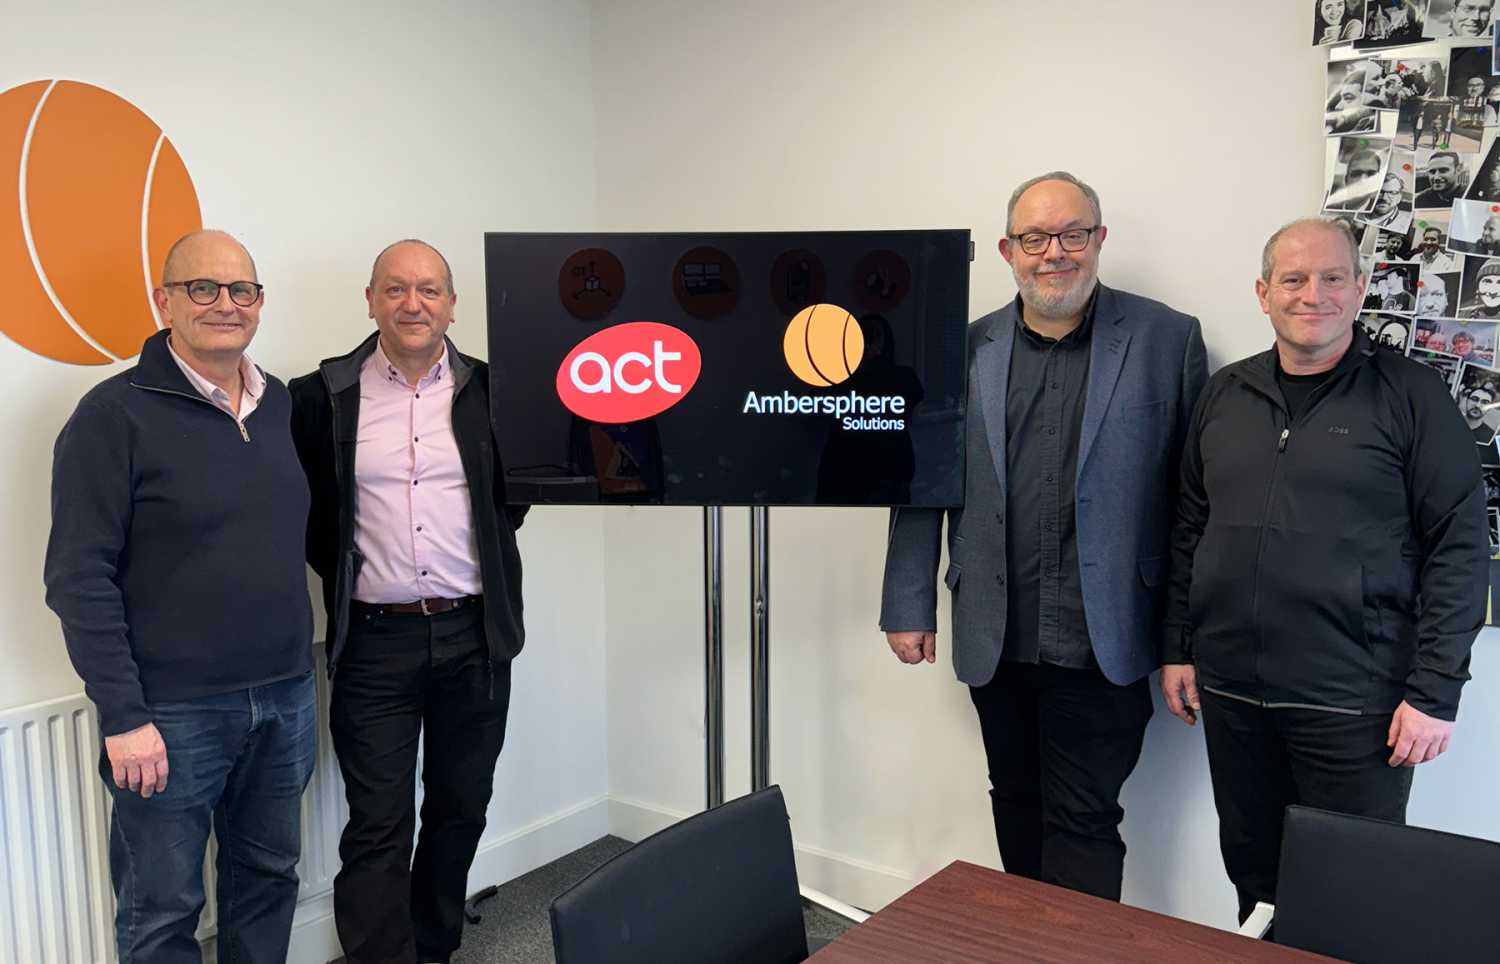 Glyn O’Donoghue, Philip Norfolk and Lee House of Ambersphere with ACT Entertainment CEO Ben Saltzman